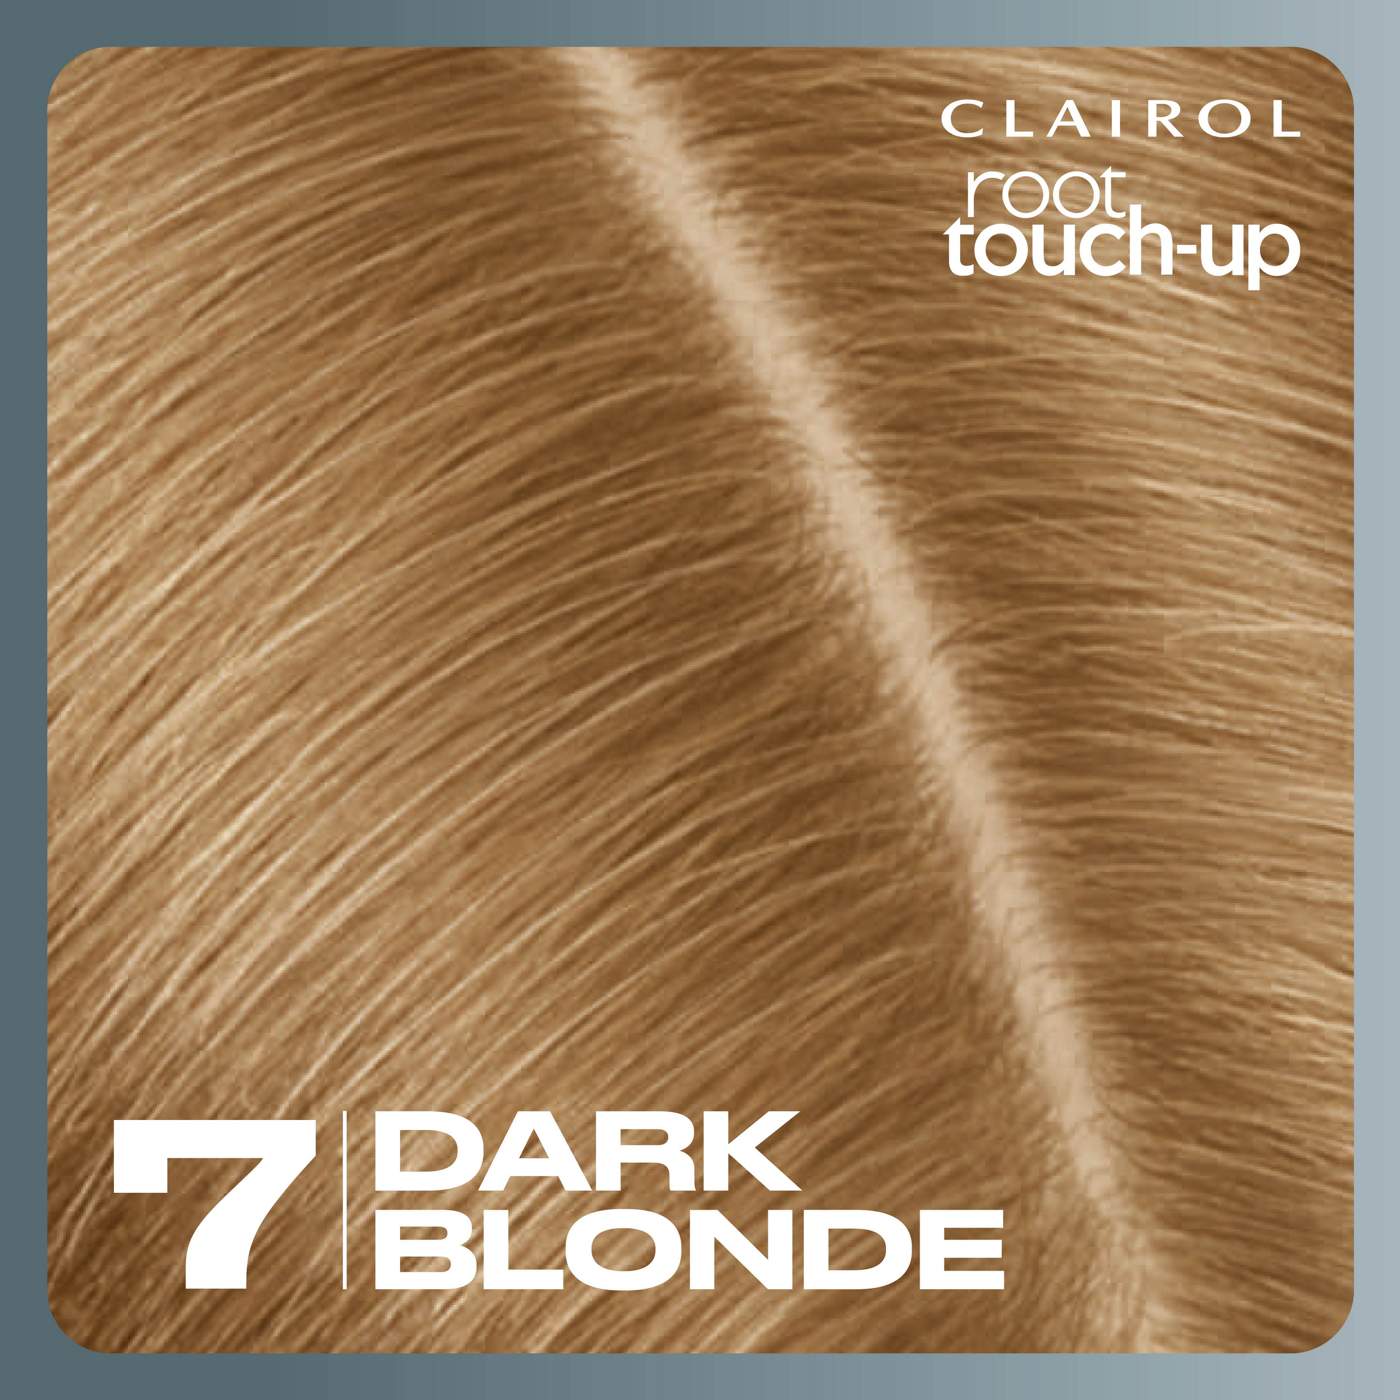 Clairol Nice 'N Easy Permanent Root Touch-Up - 7 Dark Blonde Shades; image 8 of 9